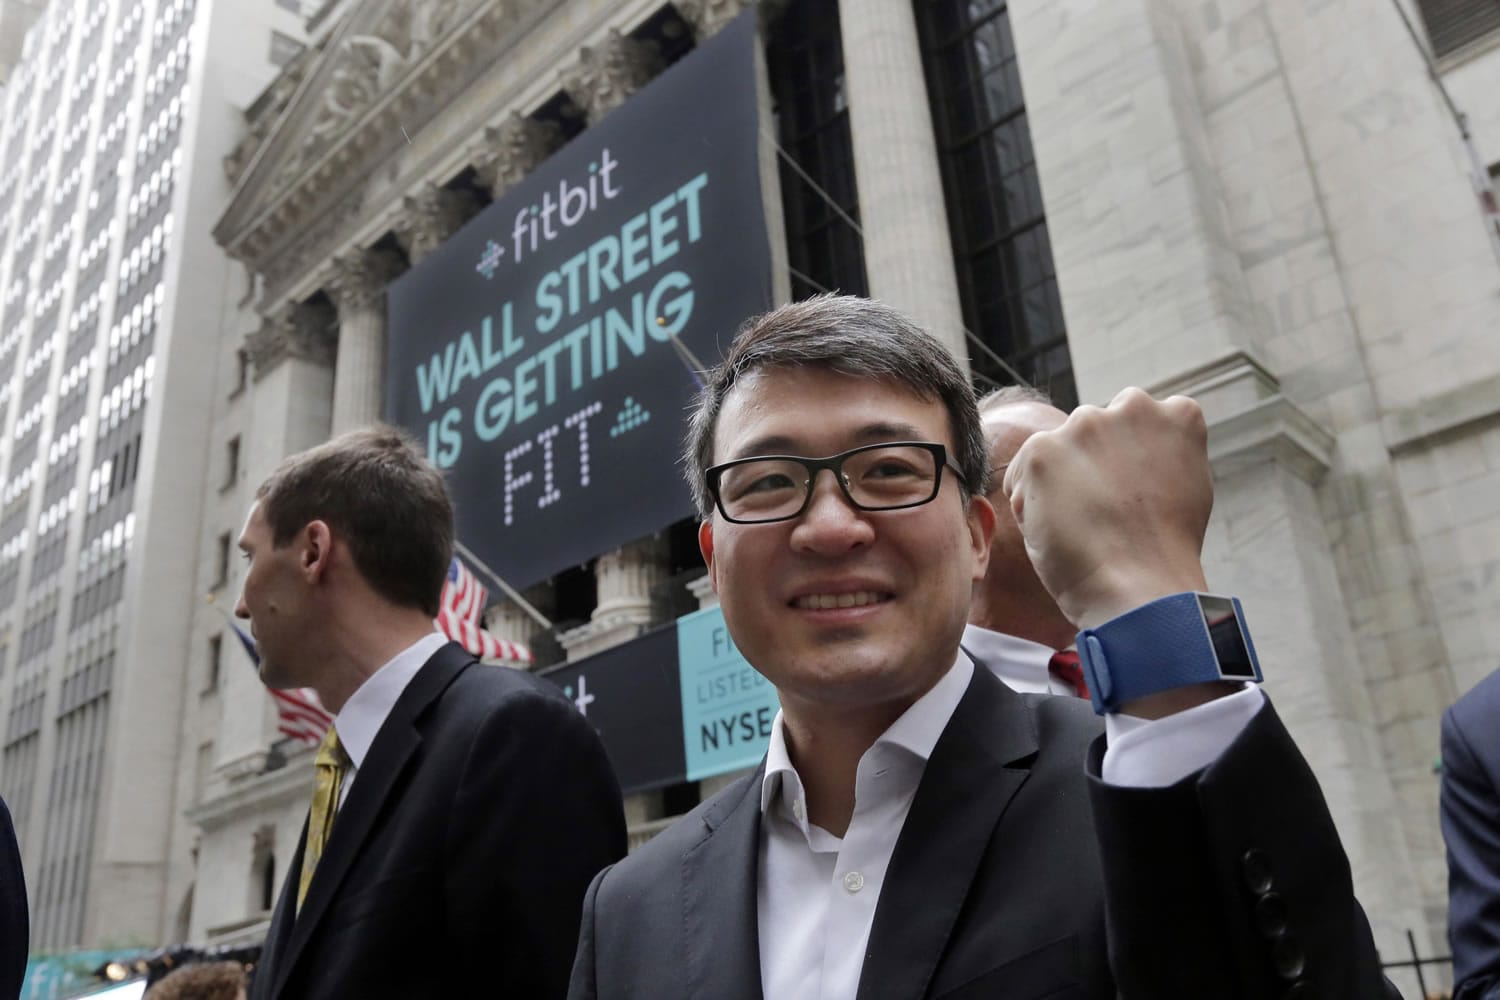 Fitbit CEO James Park shows off one of his devices on June 18 outside the New York Stock Exchange, before his company&#039;s IPO. The company&#039;s app was the most downloaded on Apple&#039;s app store on Christmas Day.